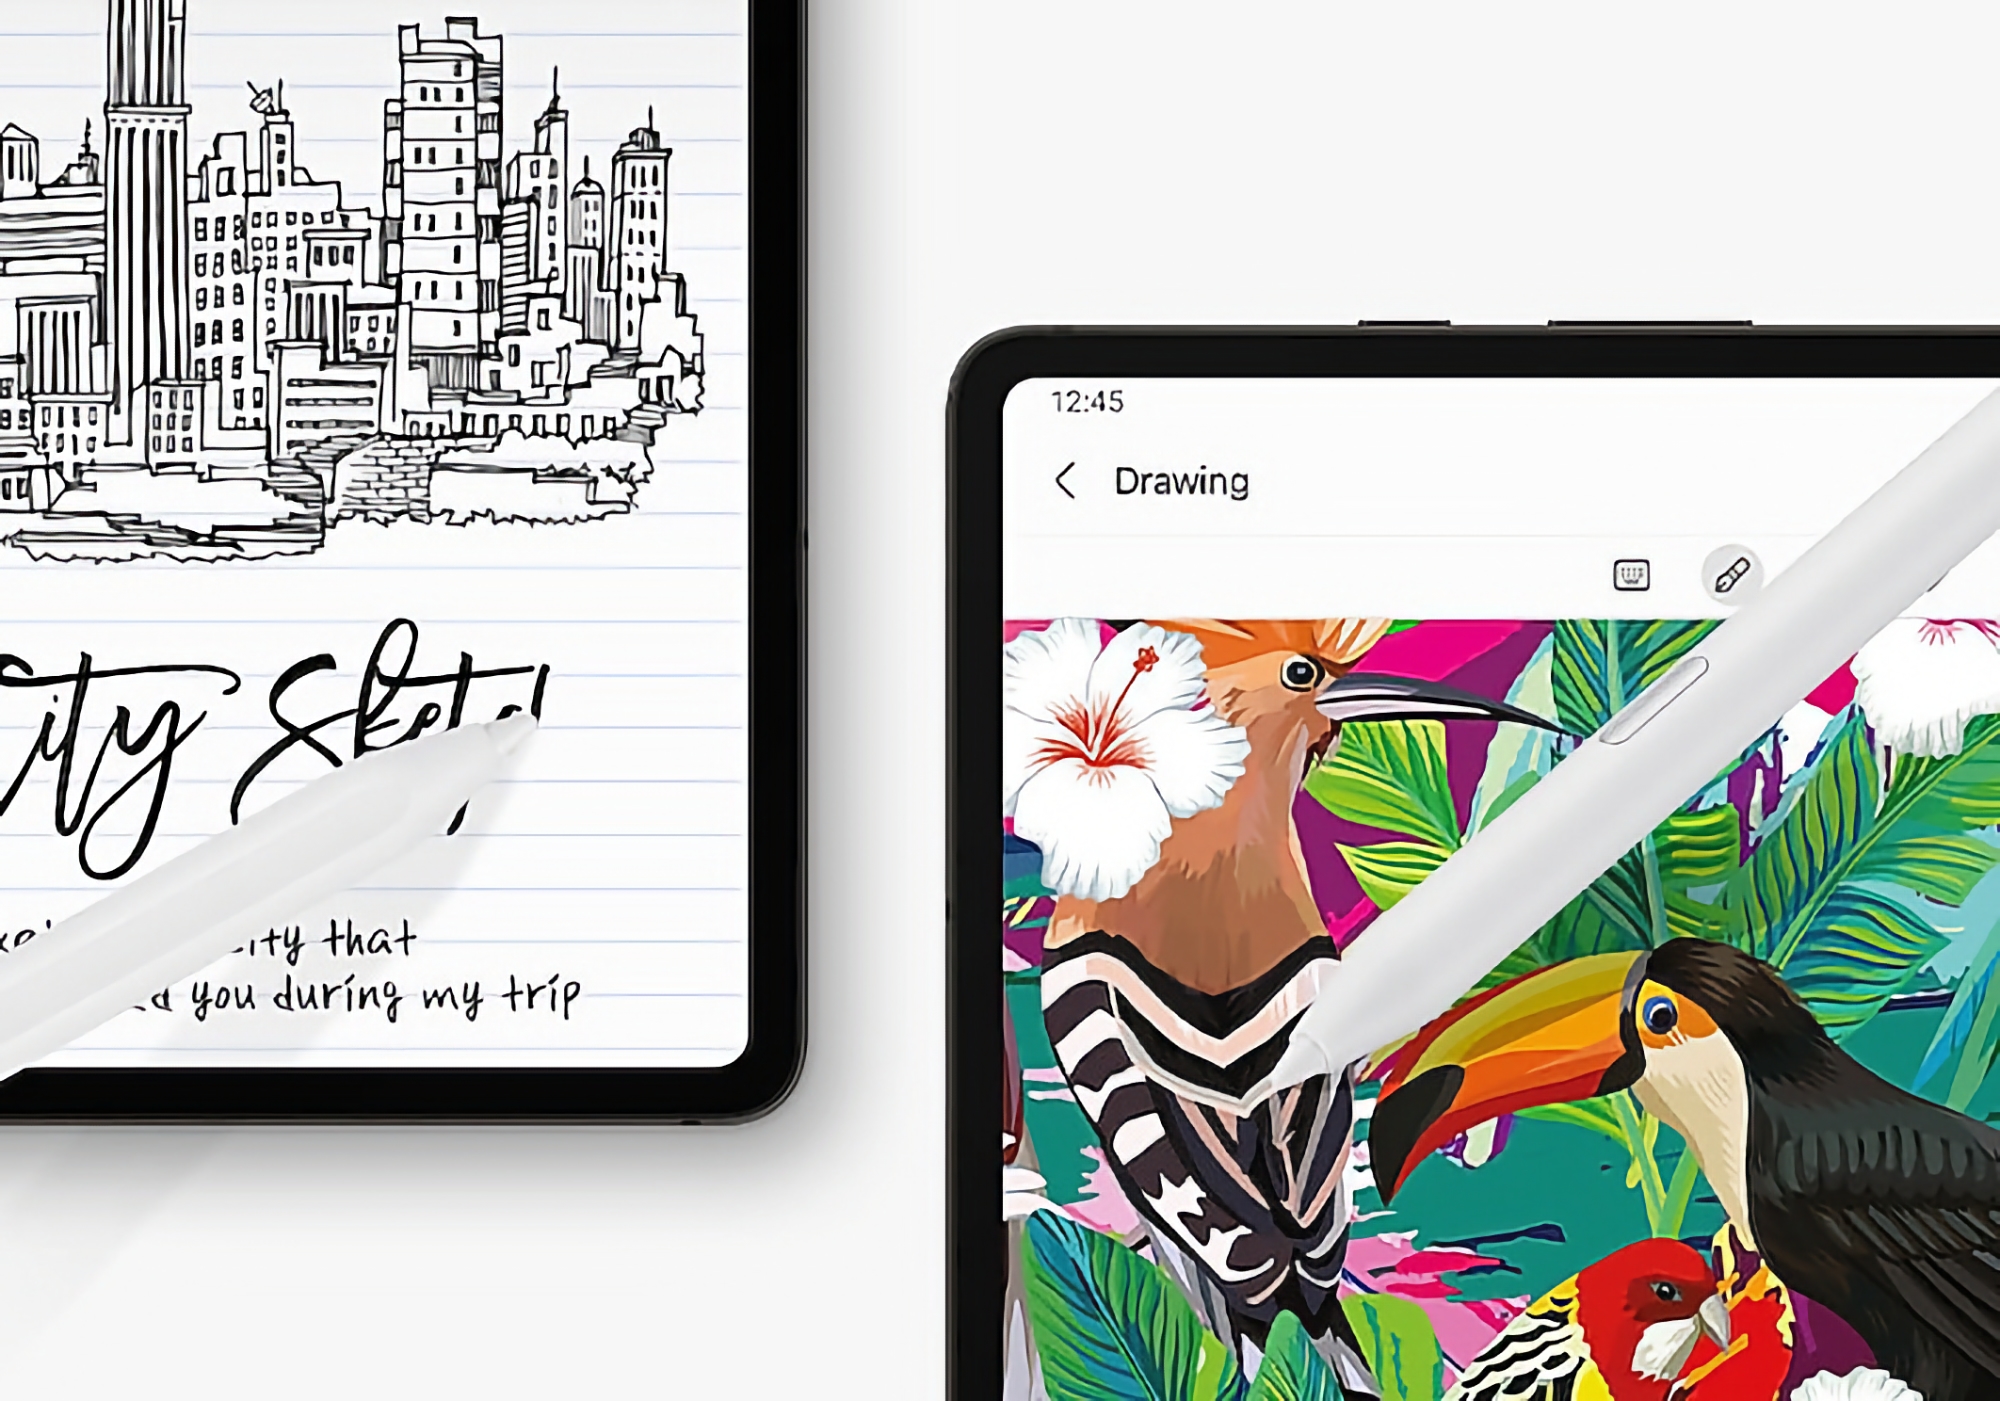 Samsung unveiled the S Pen Creator Edition in the US: an improved version of the S Pen for $100